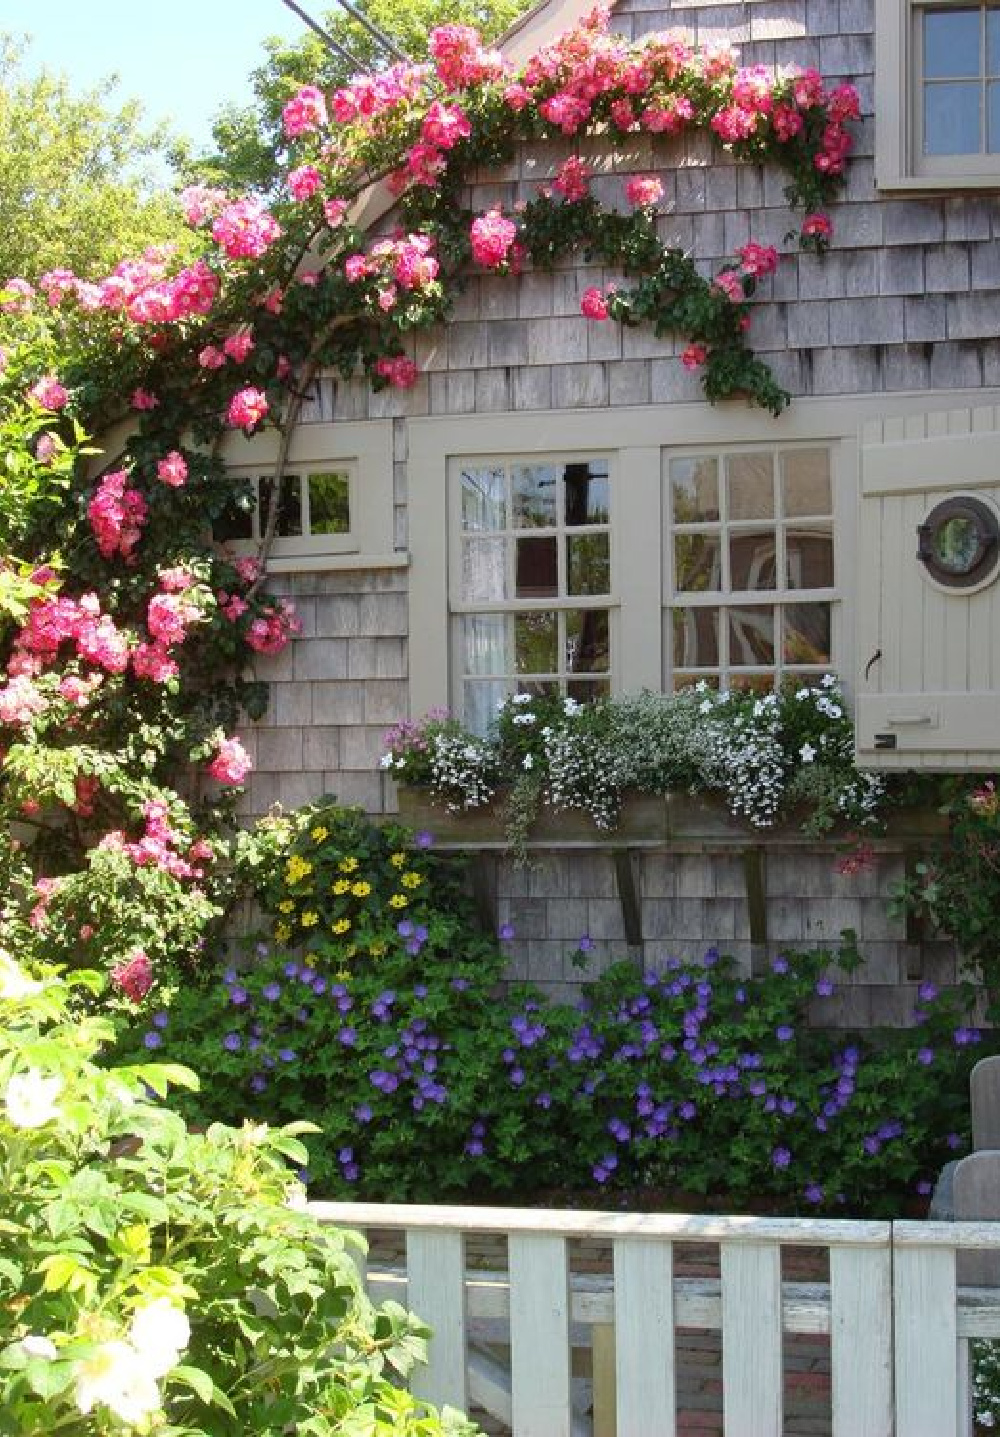 Climbing blooms on a Nantucket cottage with flower box. COME TOUR MORE Nantucket Style Chic & Summer Vibes! #nantucket #interiordesign #designinspiration #summerliving #coastalstyle